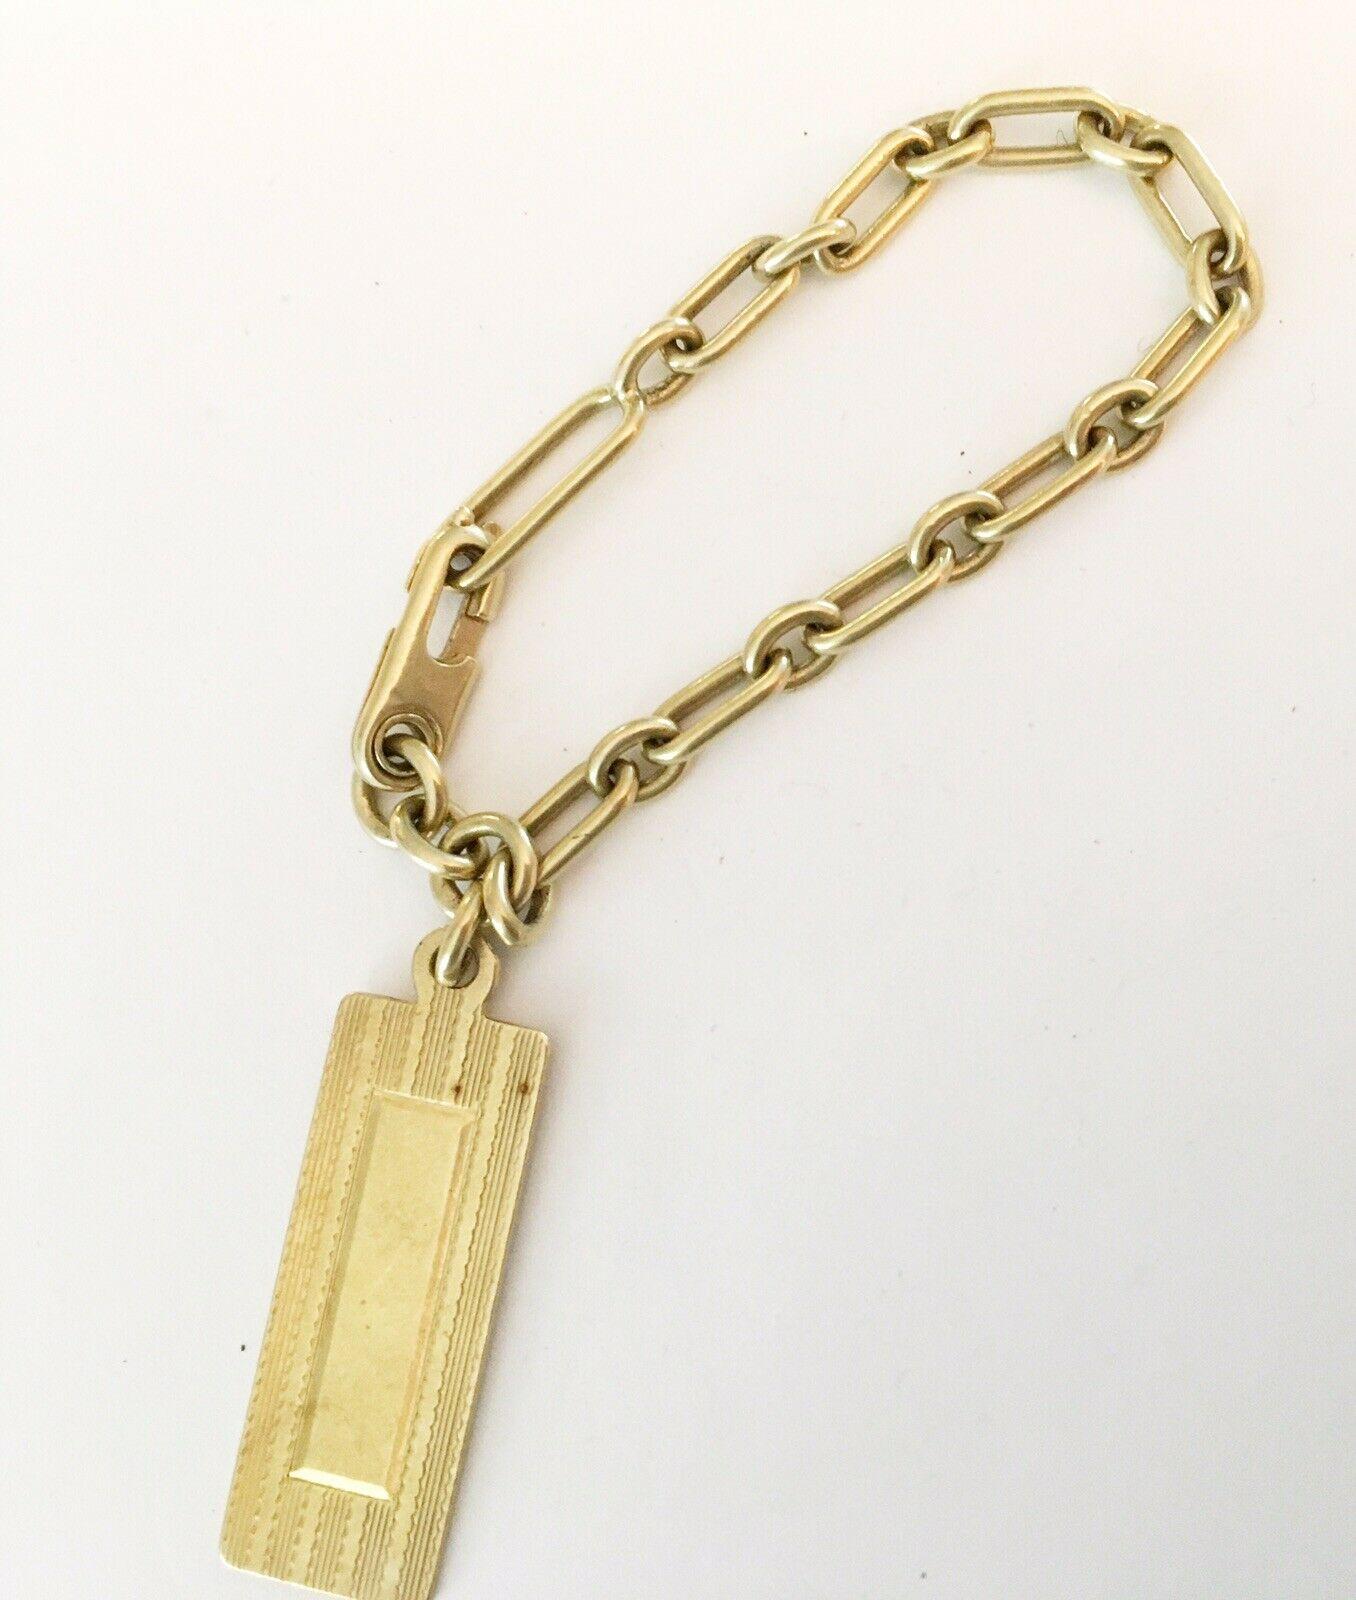 Tiffany & Co. Antique 14k Yellow Gold ID Keychain / Fob / Chain Connector Circa 1900s


Here is your chance to purchase a beautiful and highly collectible designer piece.  Truly a great piece at a great price! 

Weight: 7.4 grams

Dimensions: 3.75